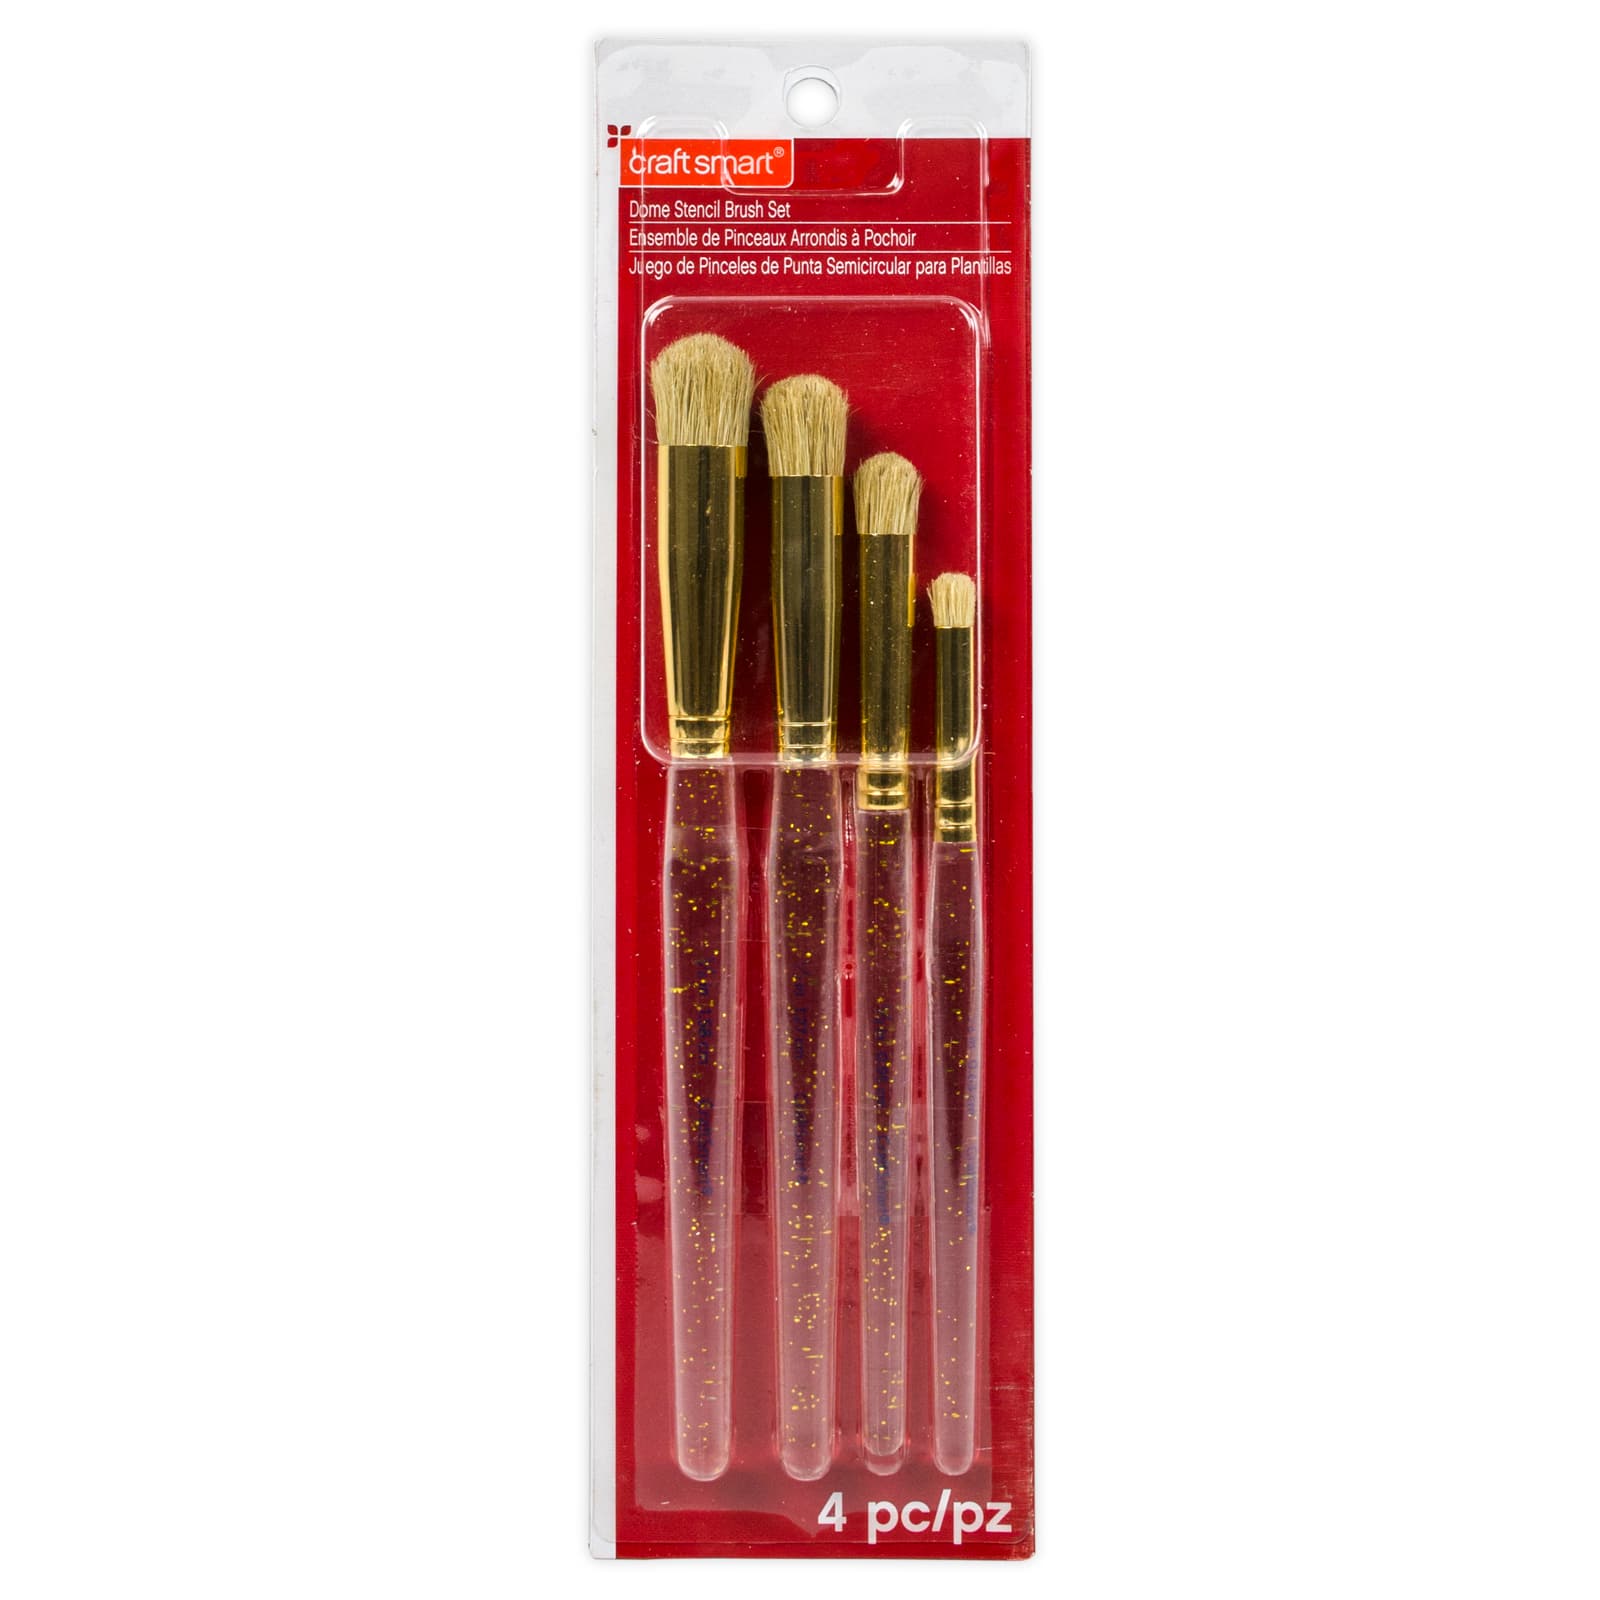 Dome Stencil Brush Set By Craft Smart®, 4 Pack